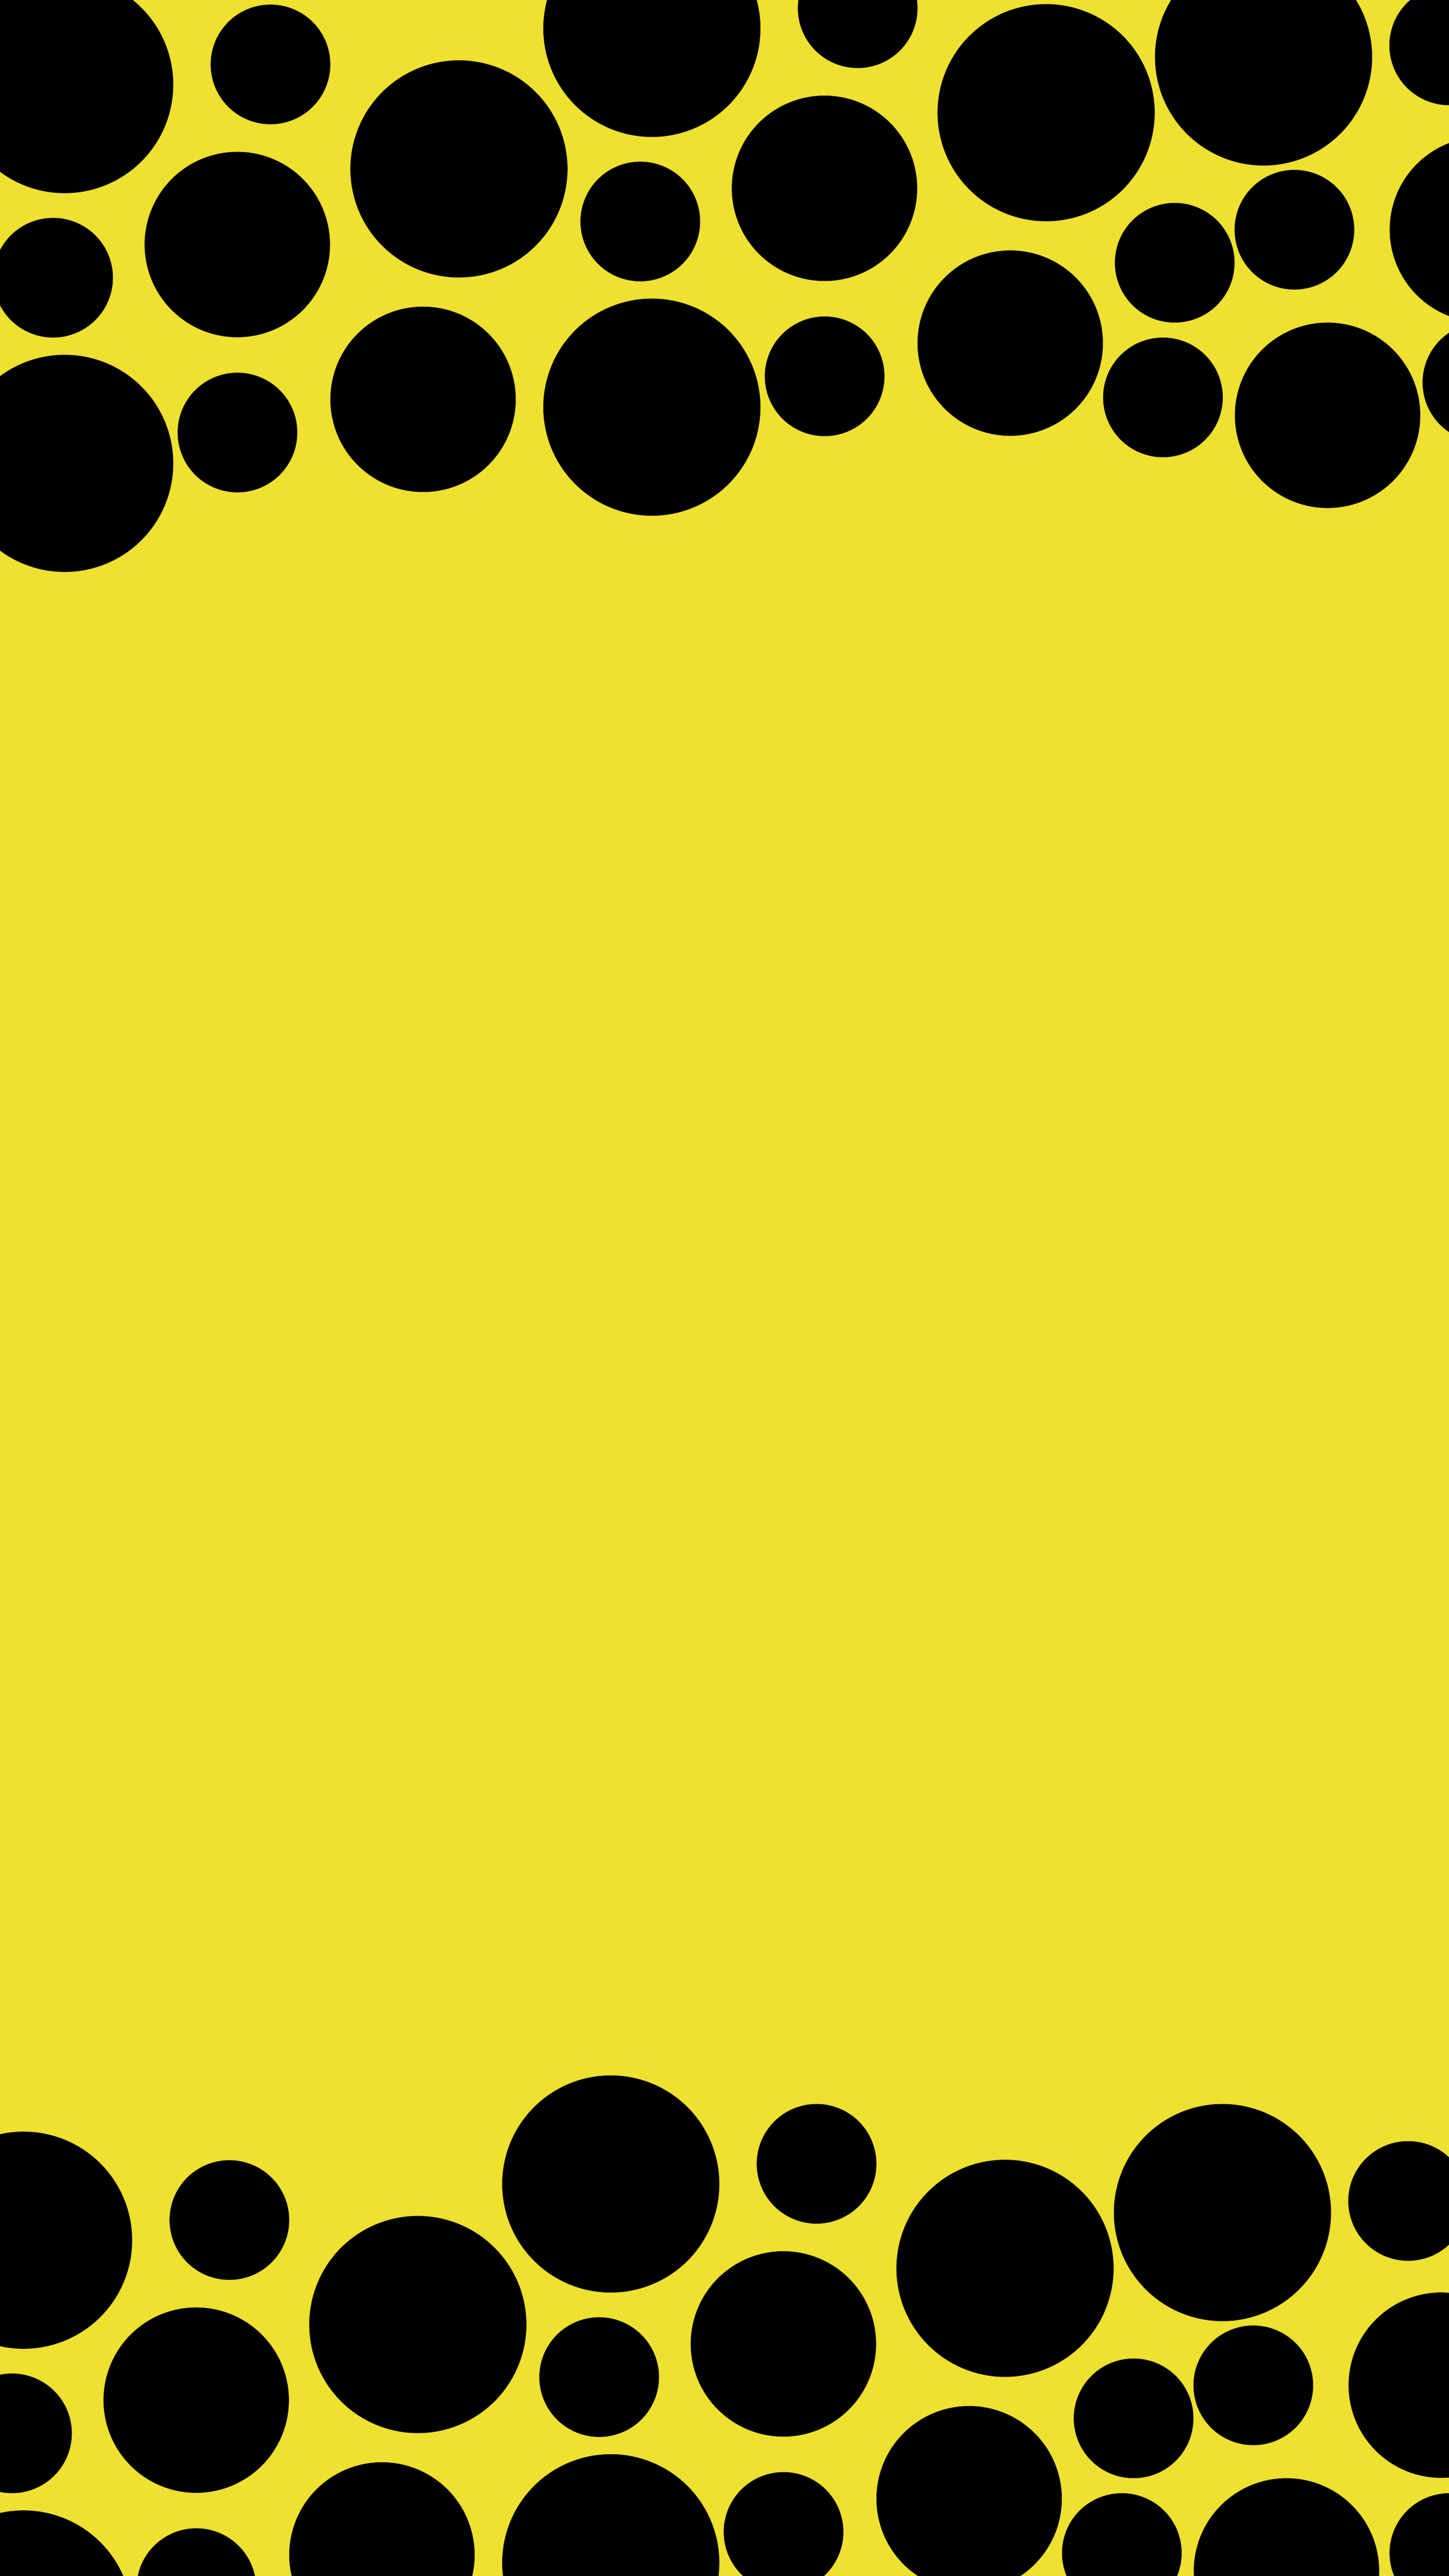 51249 free download Yellow wallpapers for phone, black, circles, minimalism, bubbles Yellow images and screensavers for mobile